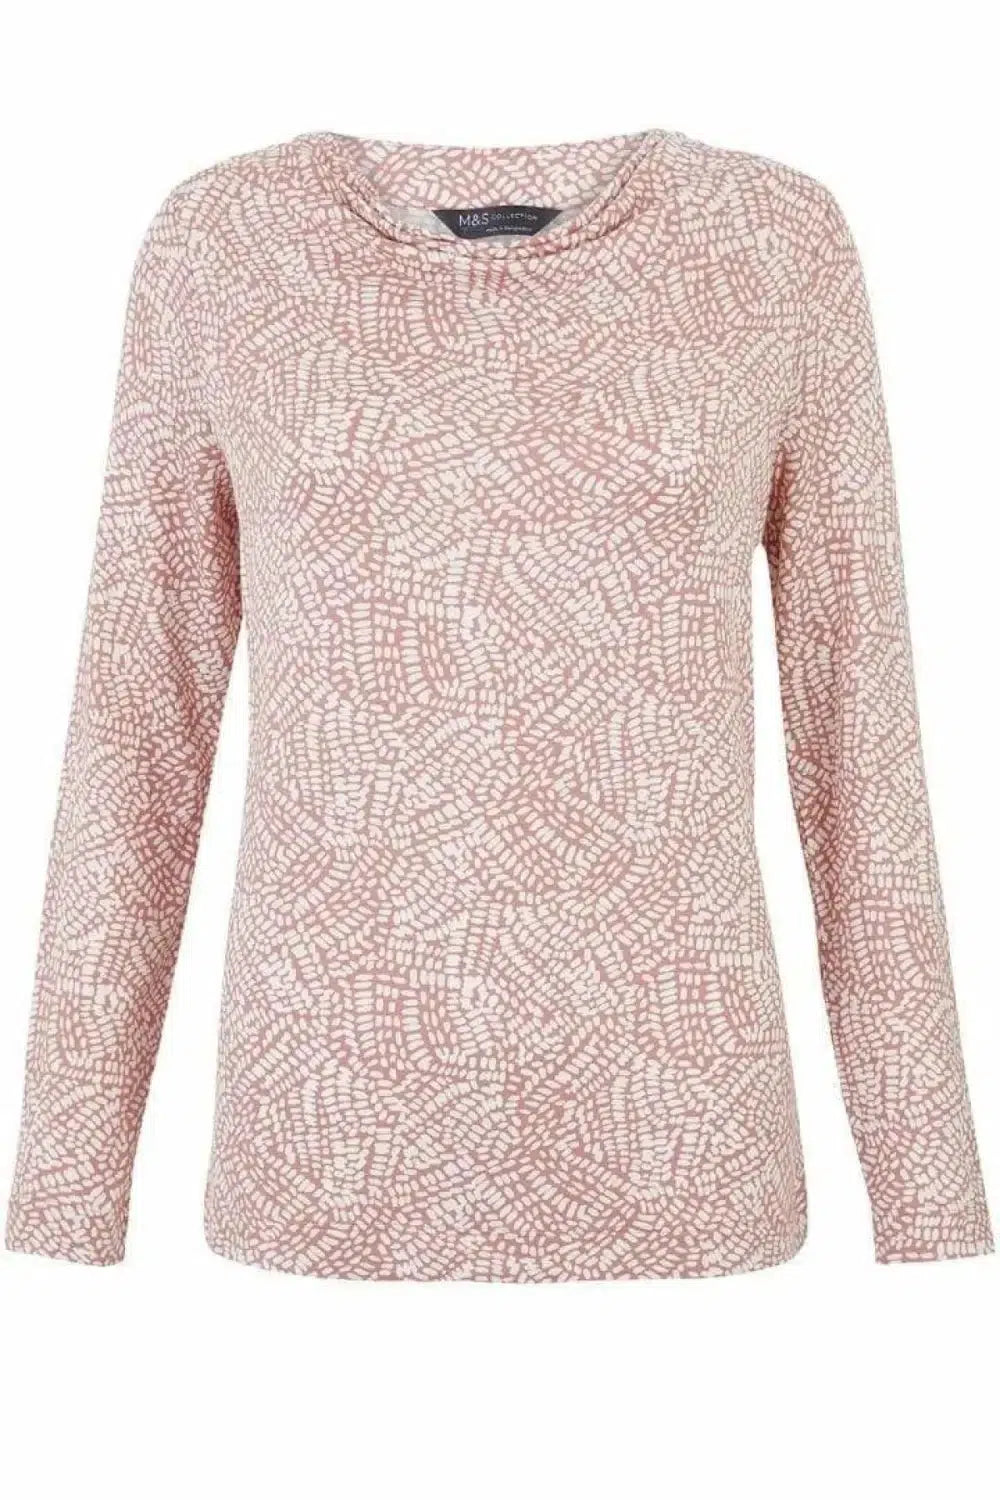 M&S Printed Cowl Neck Long Sleeve Top